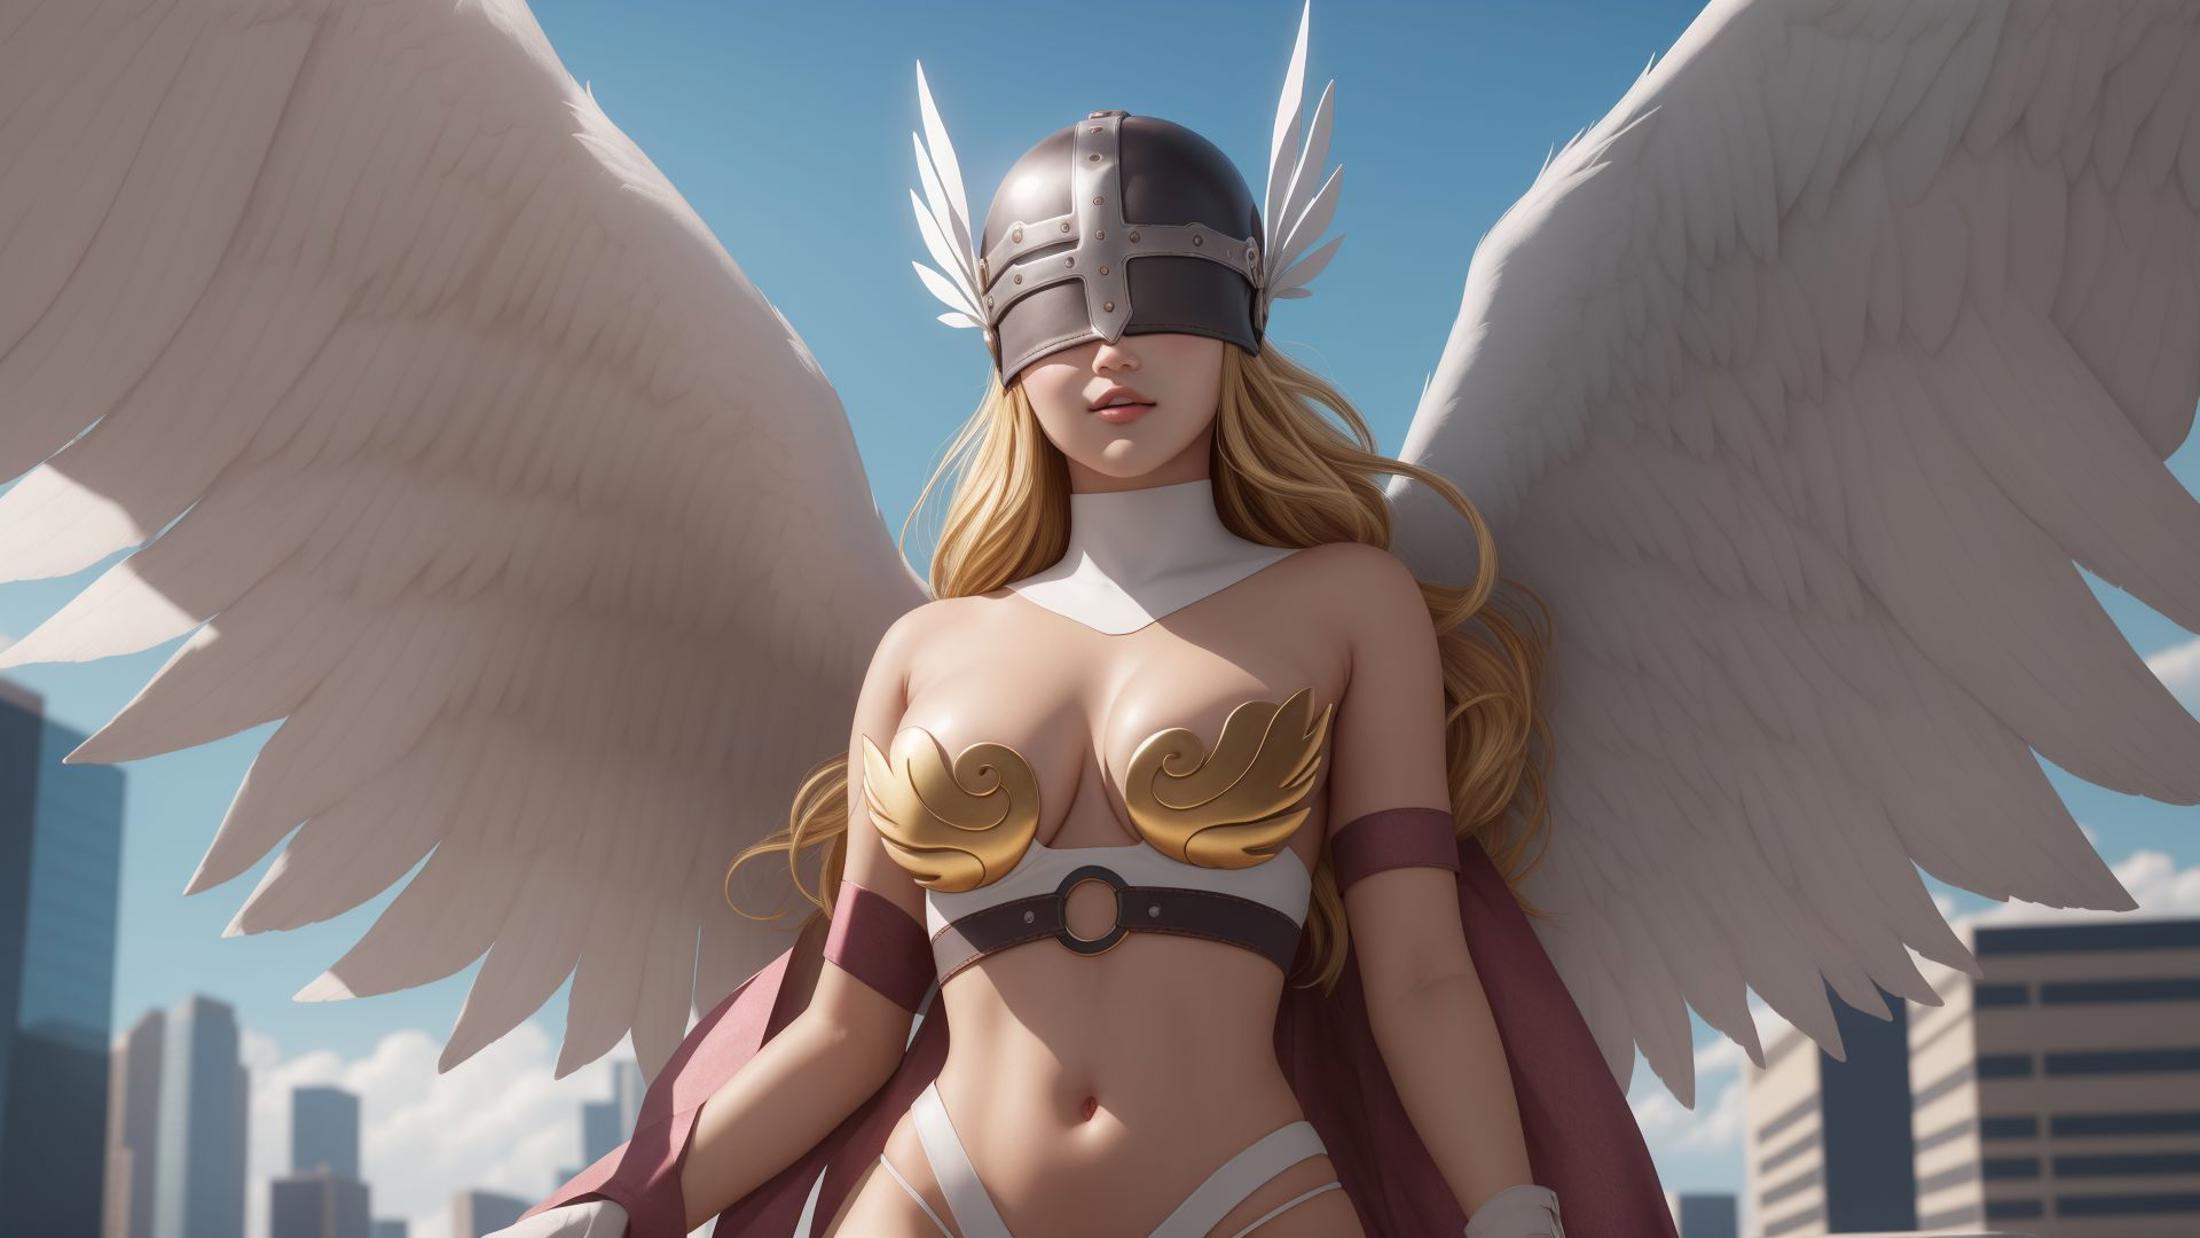 Angewomon - Digimon image by marusame